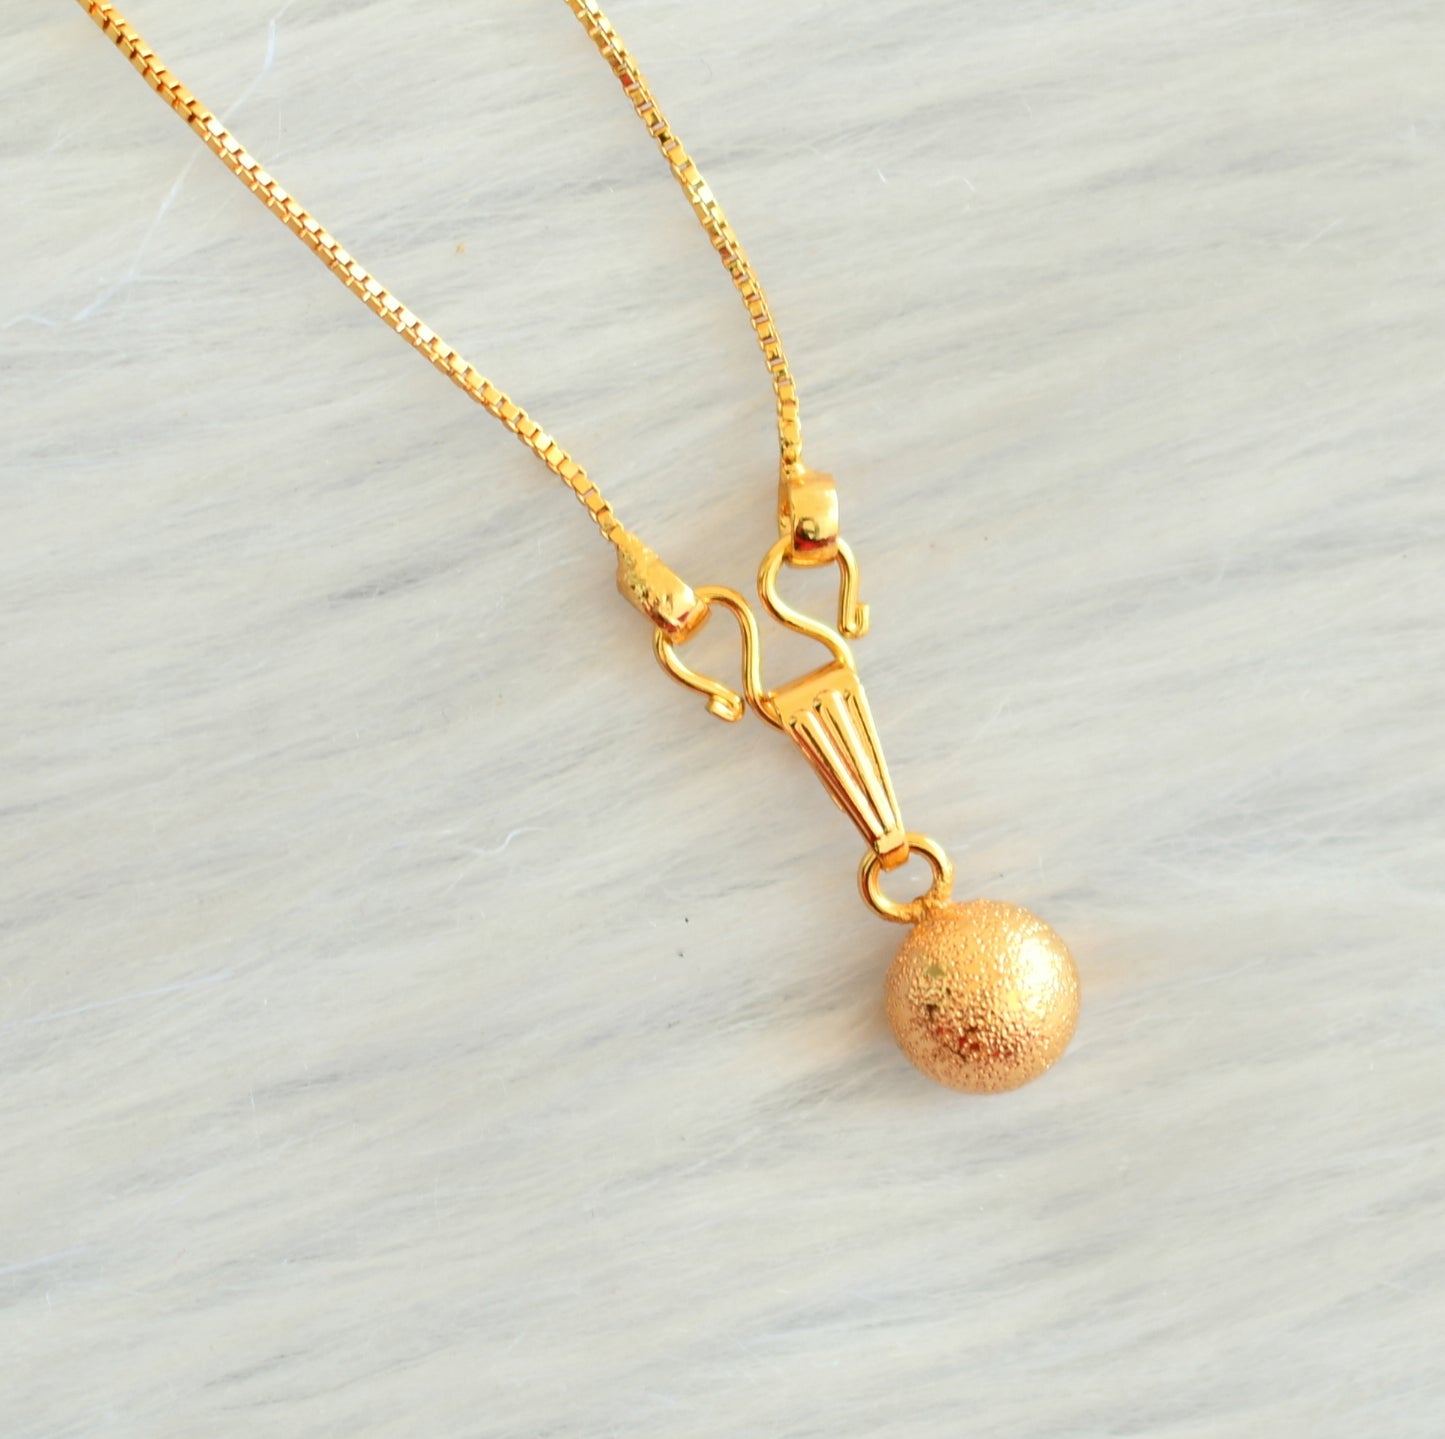 Gold tone chain with small ball pendant dj-34601